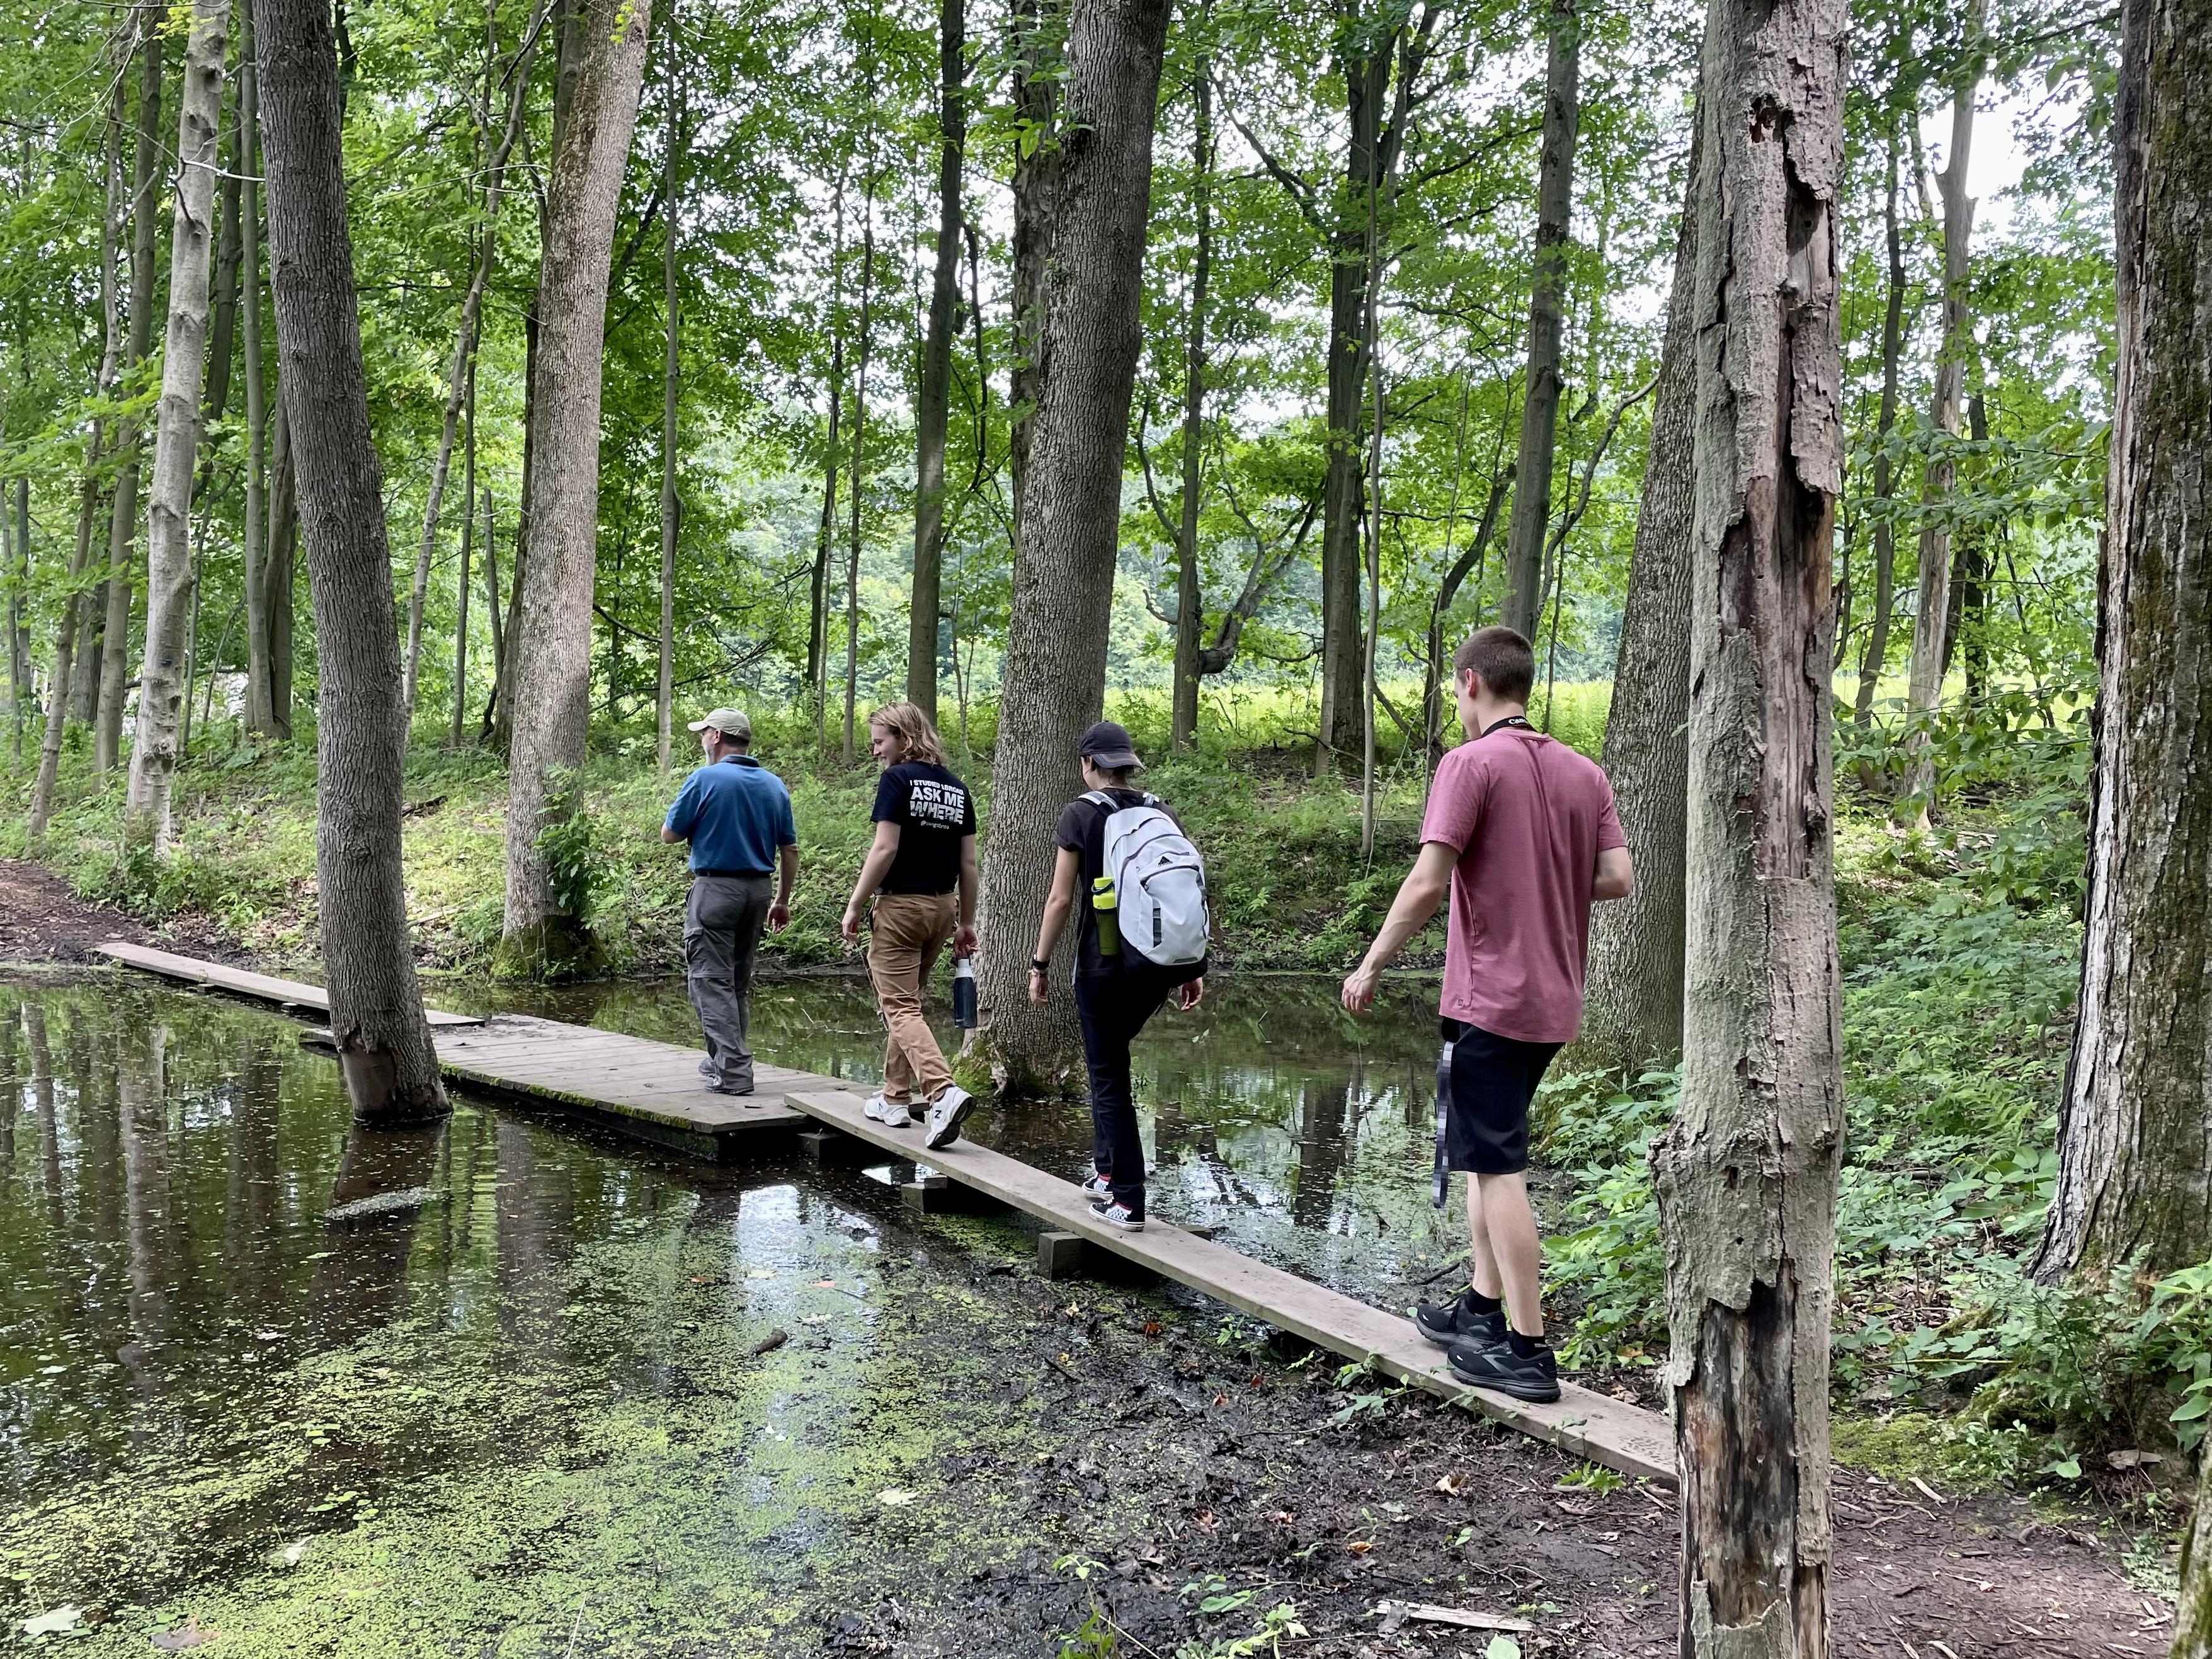 alking a trail are, from left, Jim D'Angelo, director of Sterling Nature Center, with student filmmakers Wells Liscomb and Lauren Smith (both seniors) and Ryan King (who graduated in 2023).